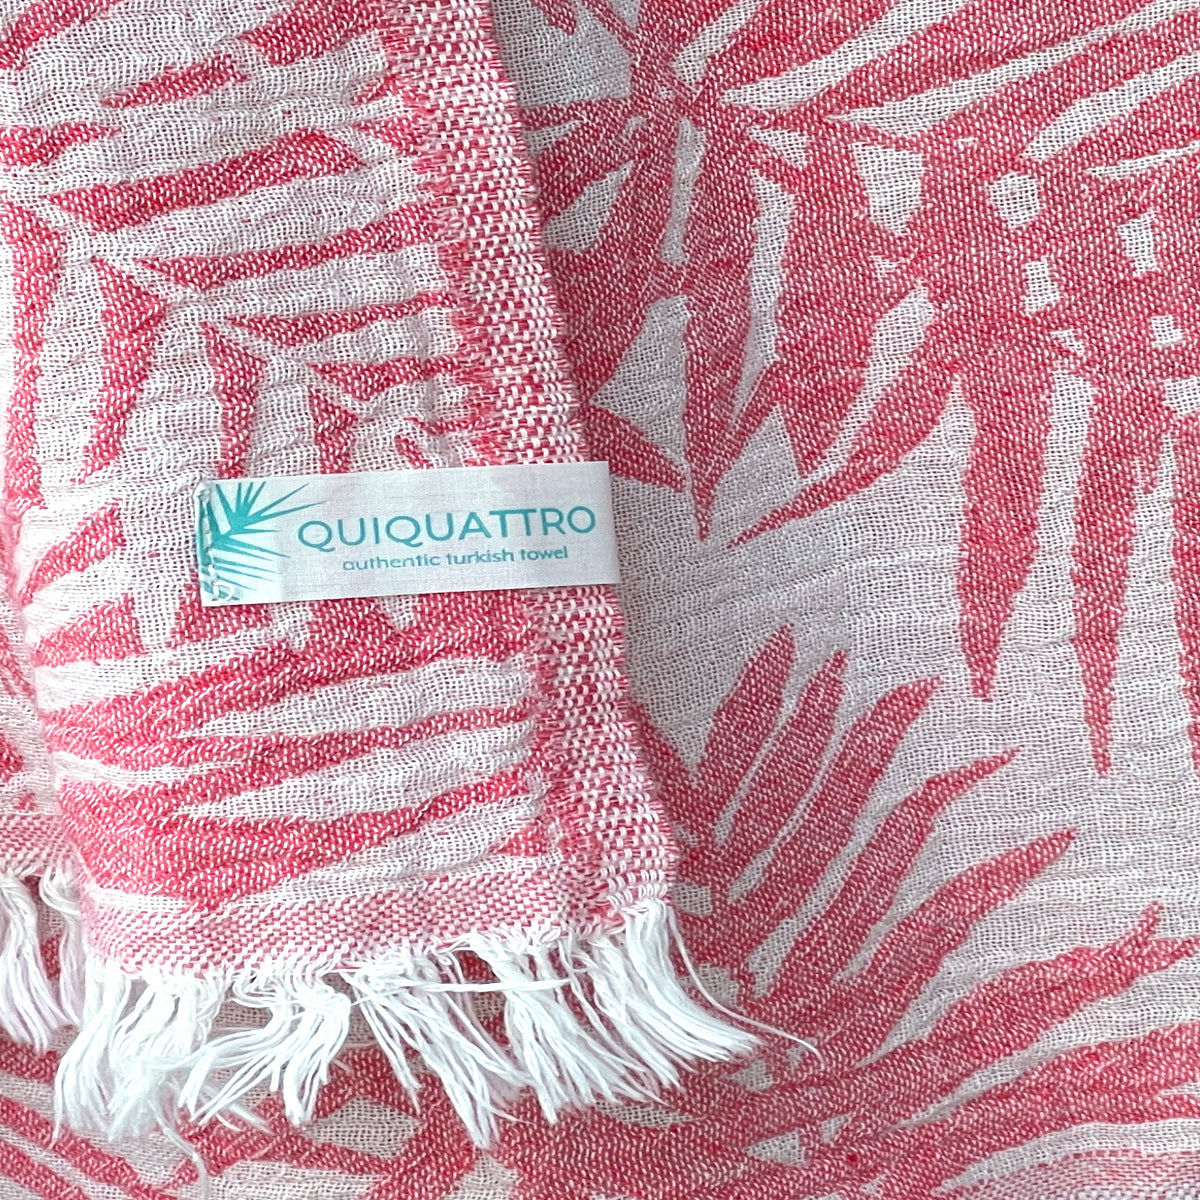 Authentic Turkish Towels for from – and Quiquattro bath more beach, QuiQuattro